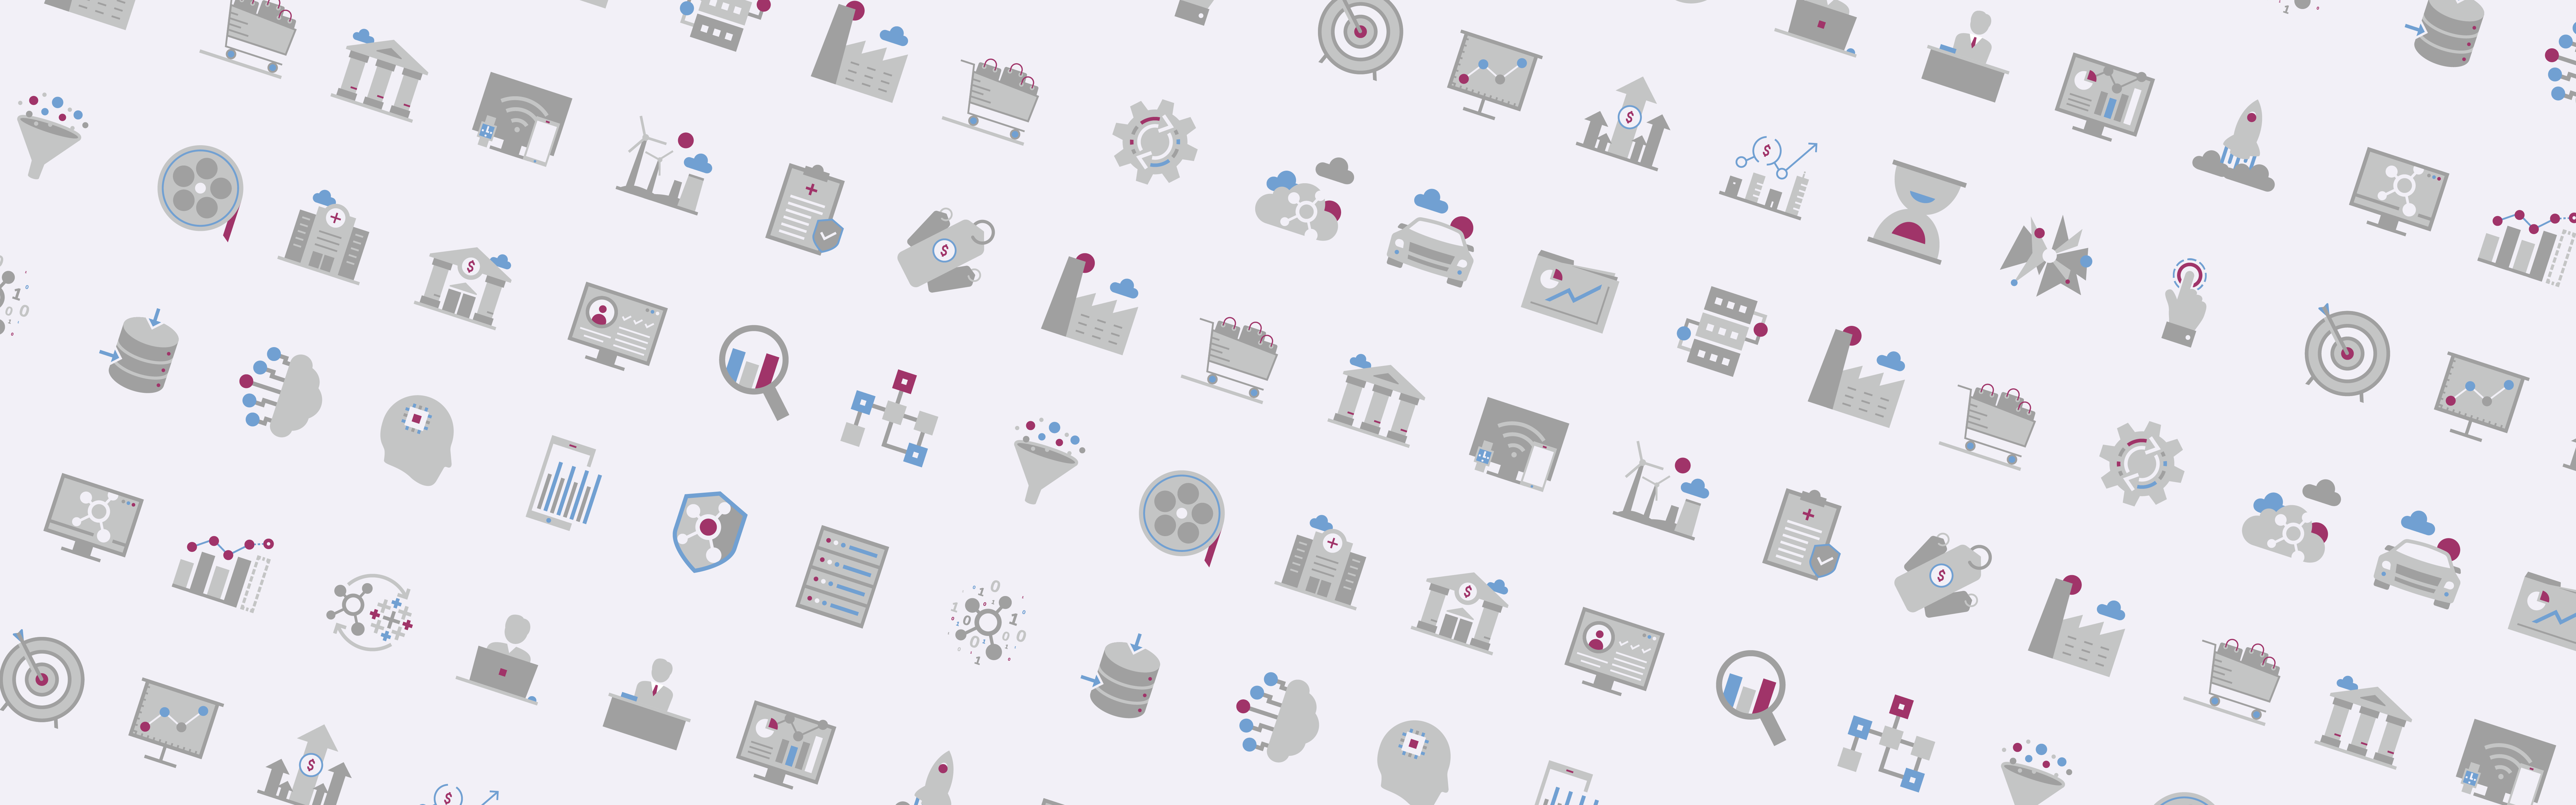 The image shows a repeating pattern of various flat design icons representing data analytics and business intelligence. Elements include graphs, targets, shields, magnifying glasses, and folders, suggesting a theme of strategy, data